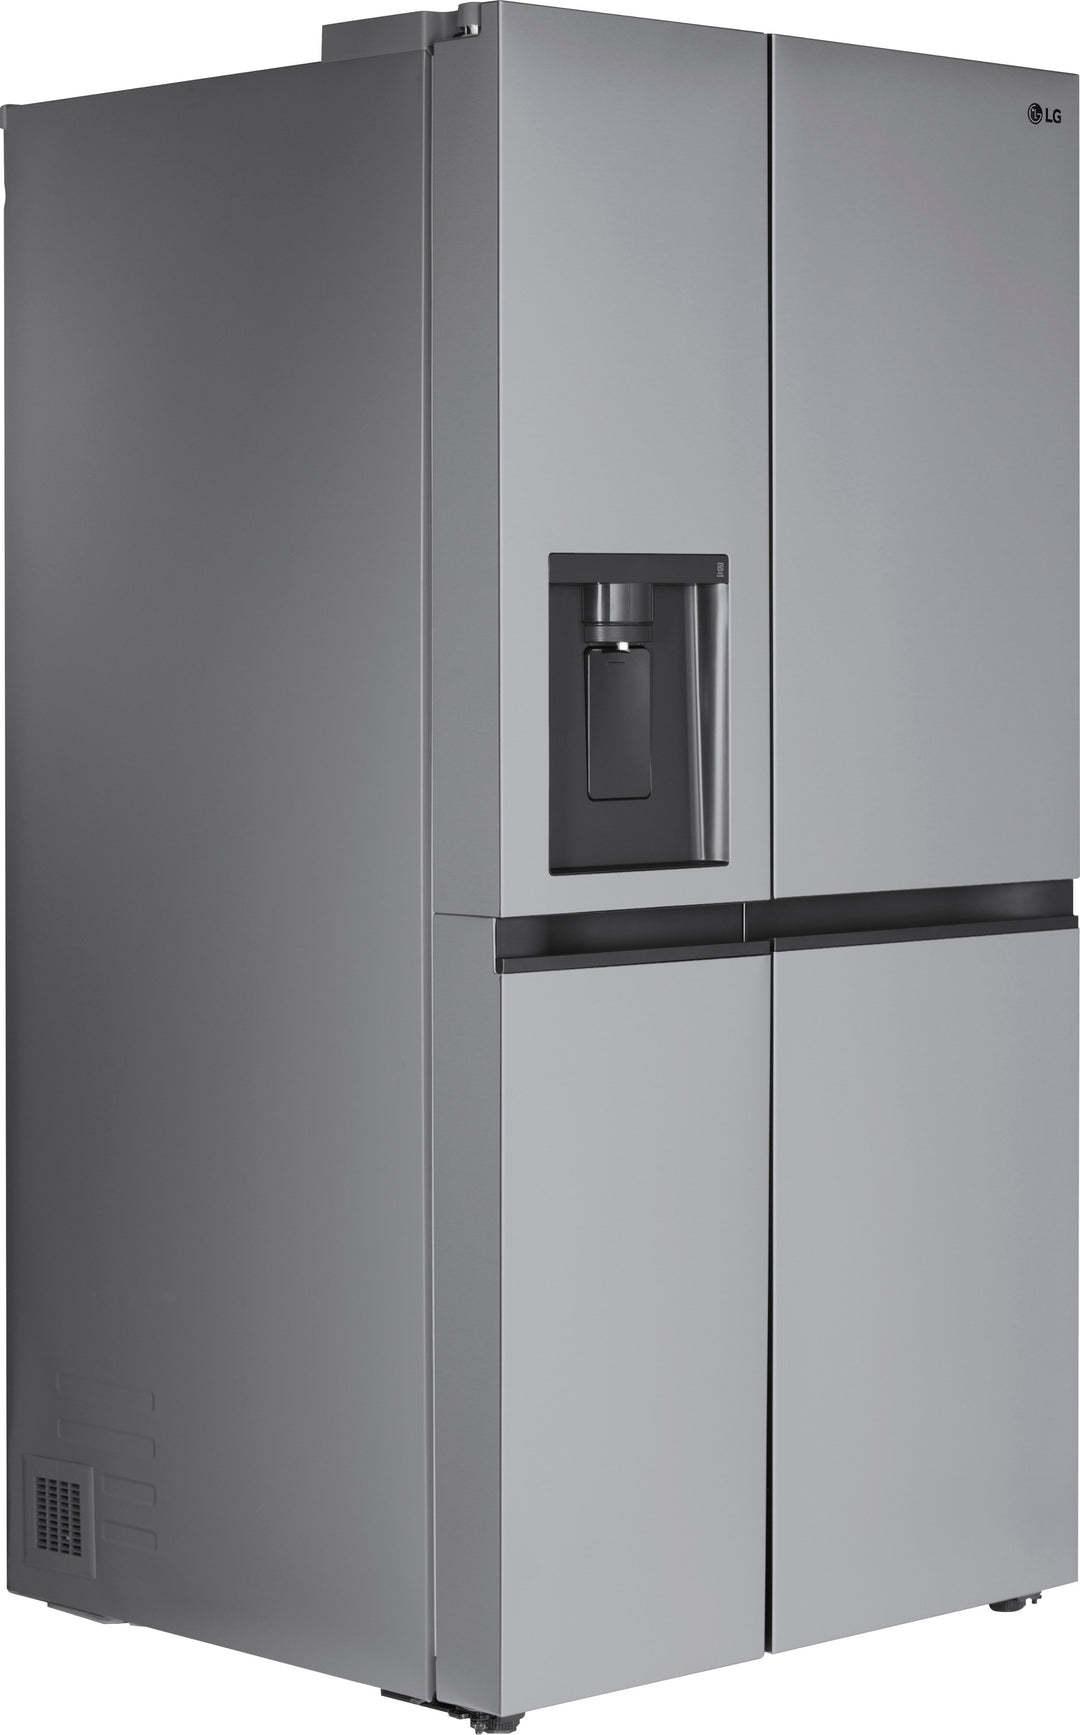 LG - 27.6 Cu. Ft. Side-by-Side Smart Refrigerator - Stainless steel_1